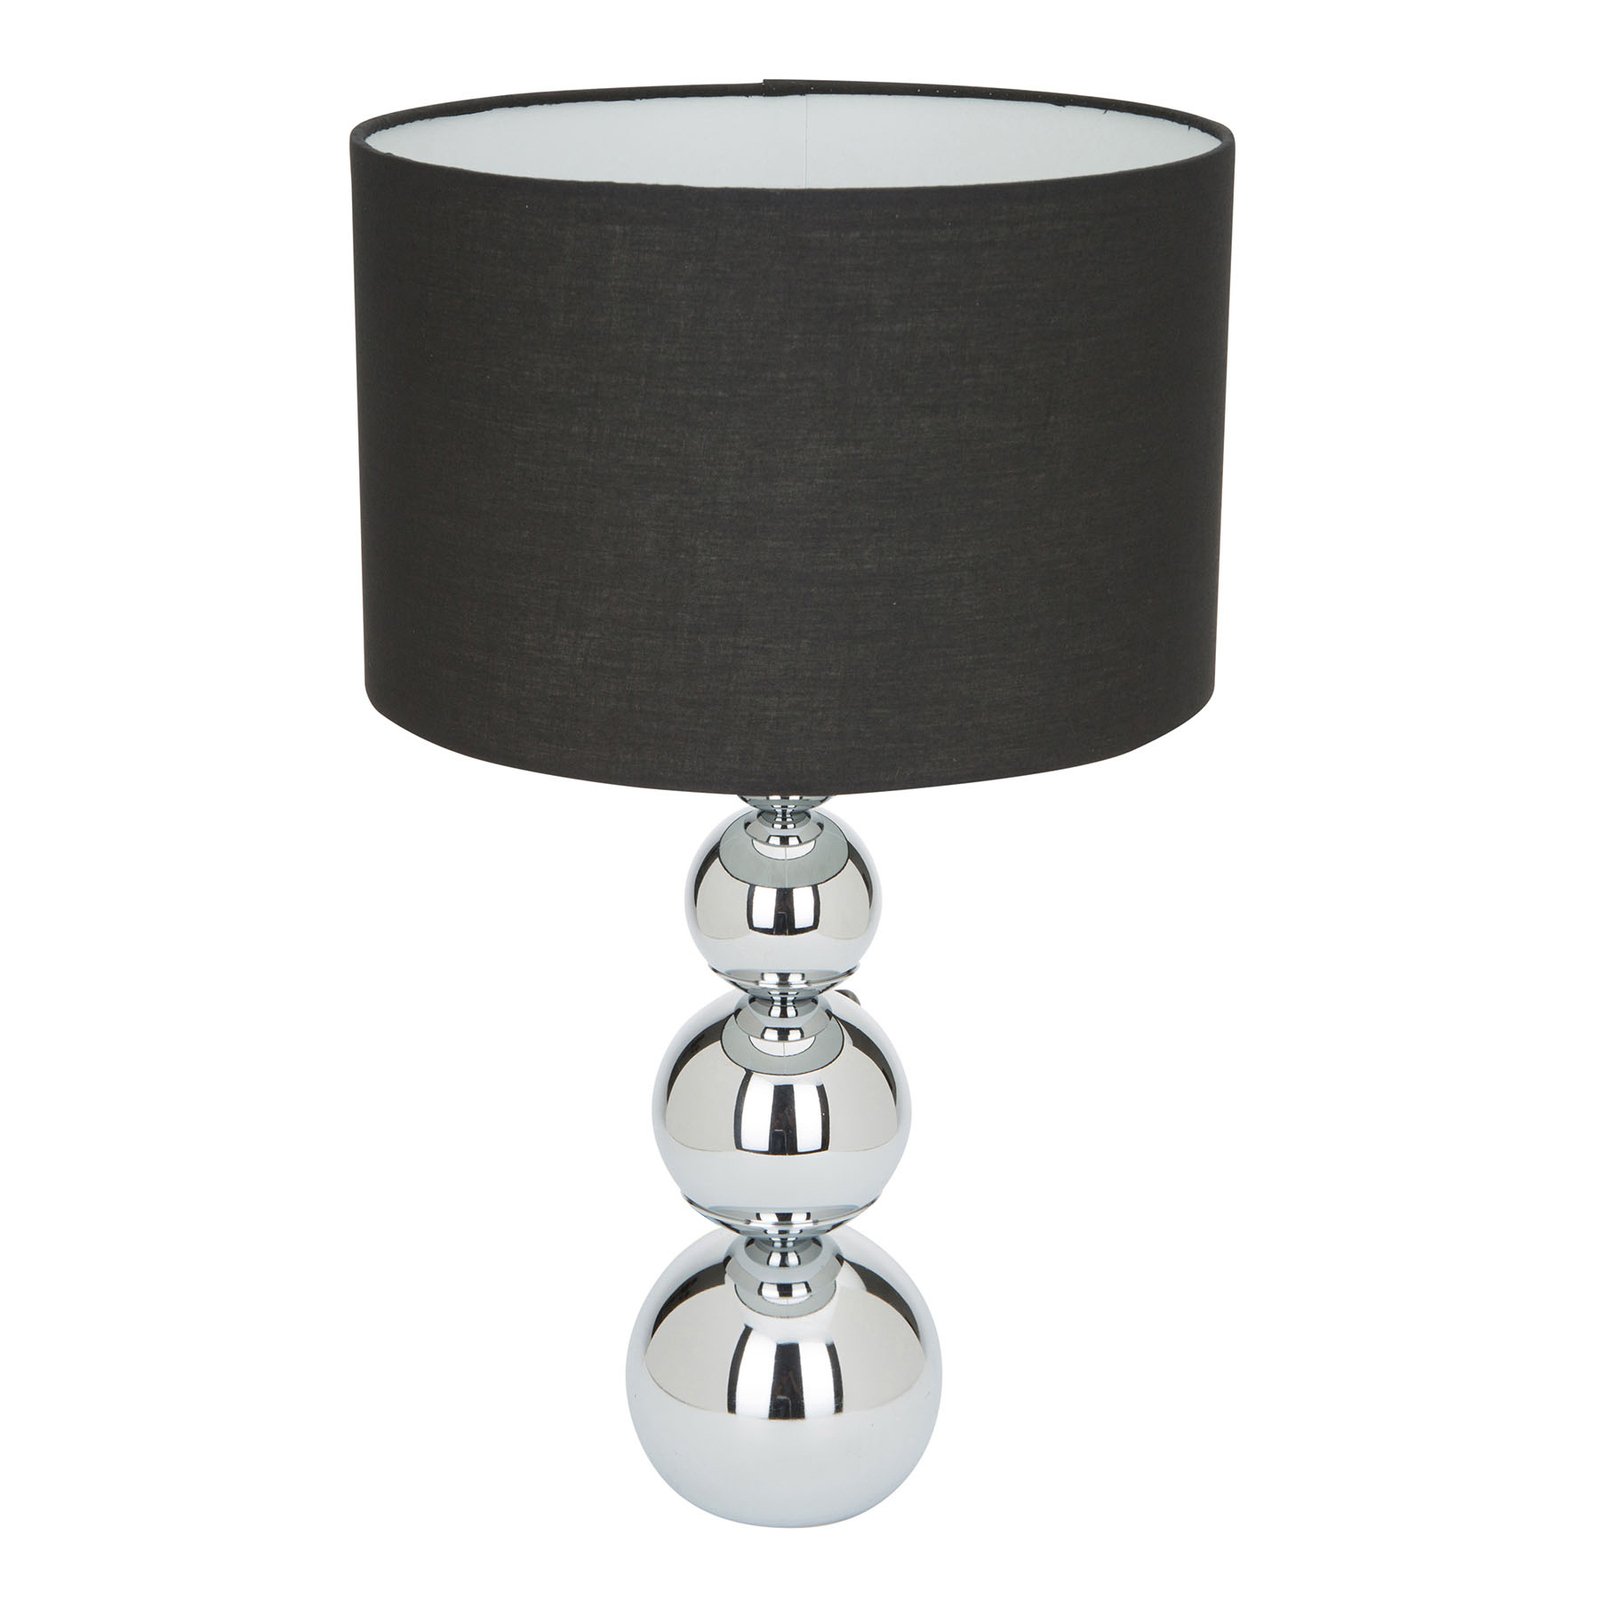 Mandy table lamp, black, touch function